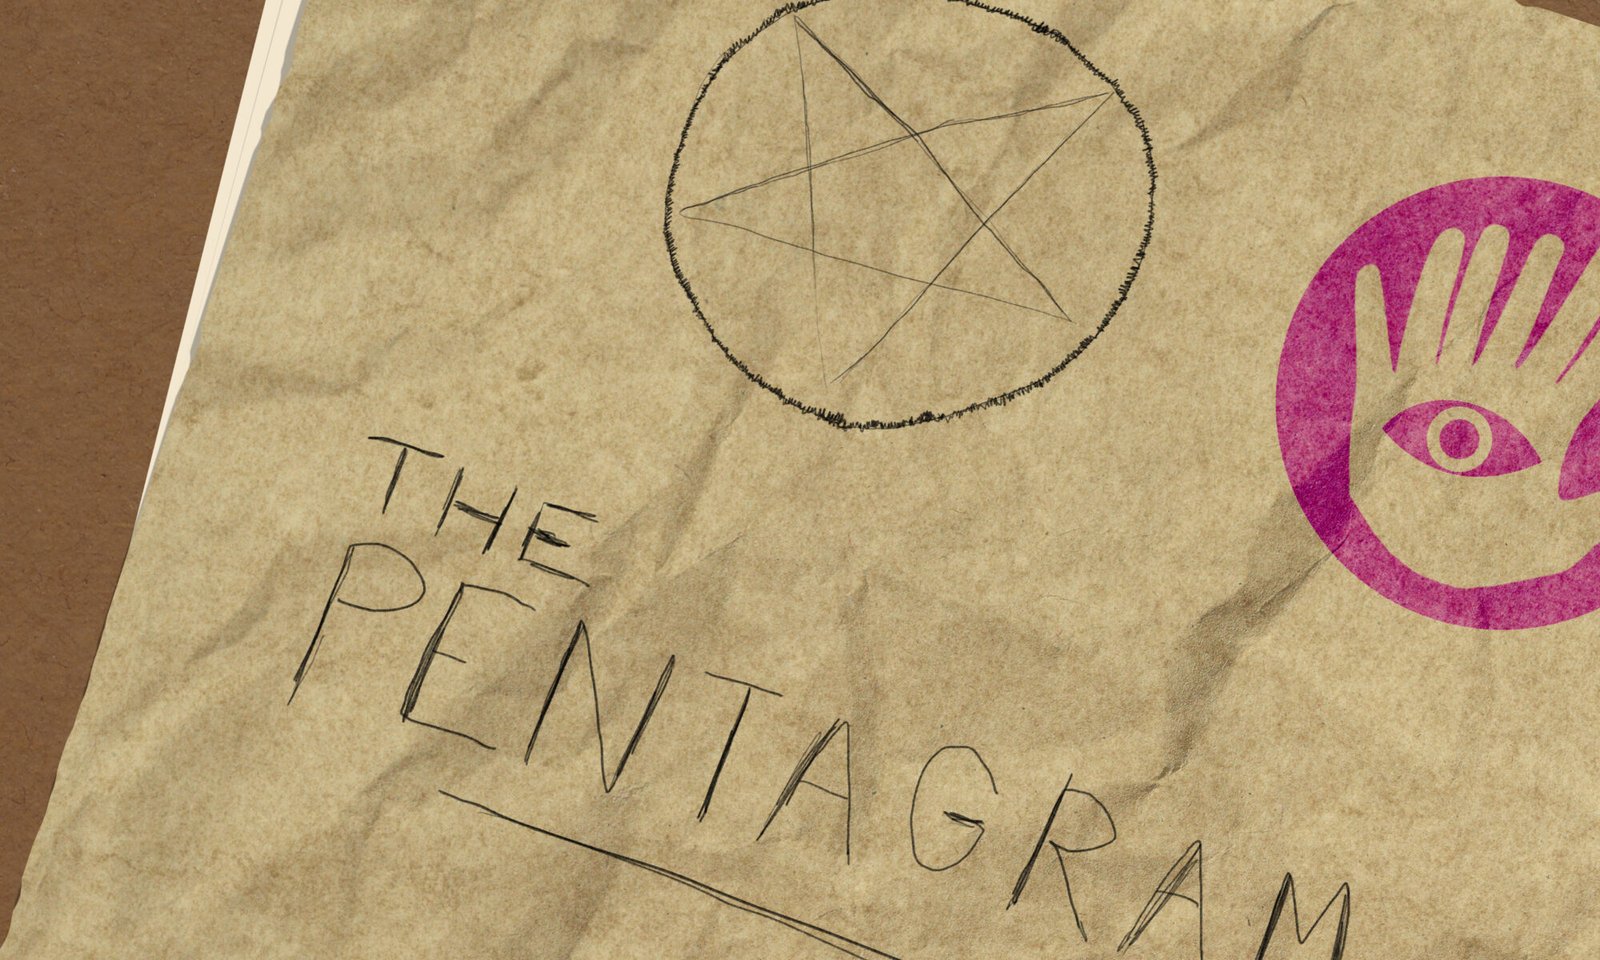 A slightly crinkled paper with a crudely drawn pentagram next to a stamped 7-fingered hand with an eye in the center. Handwritten text: THE PENTAGRAM.